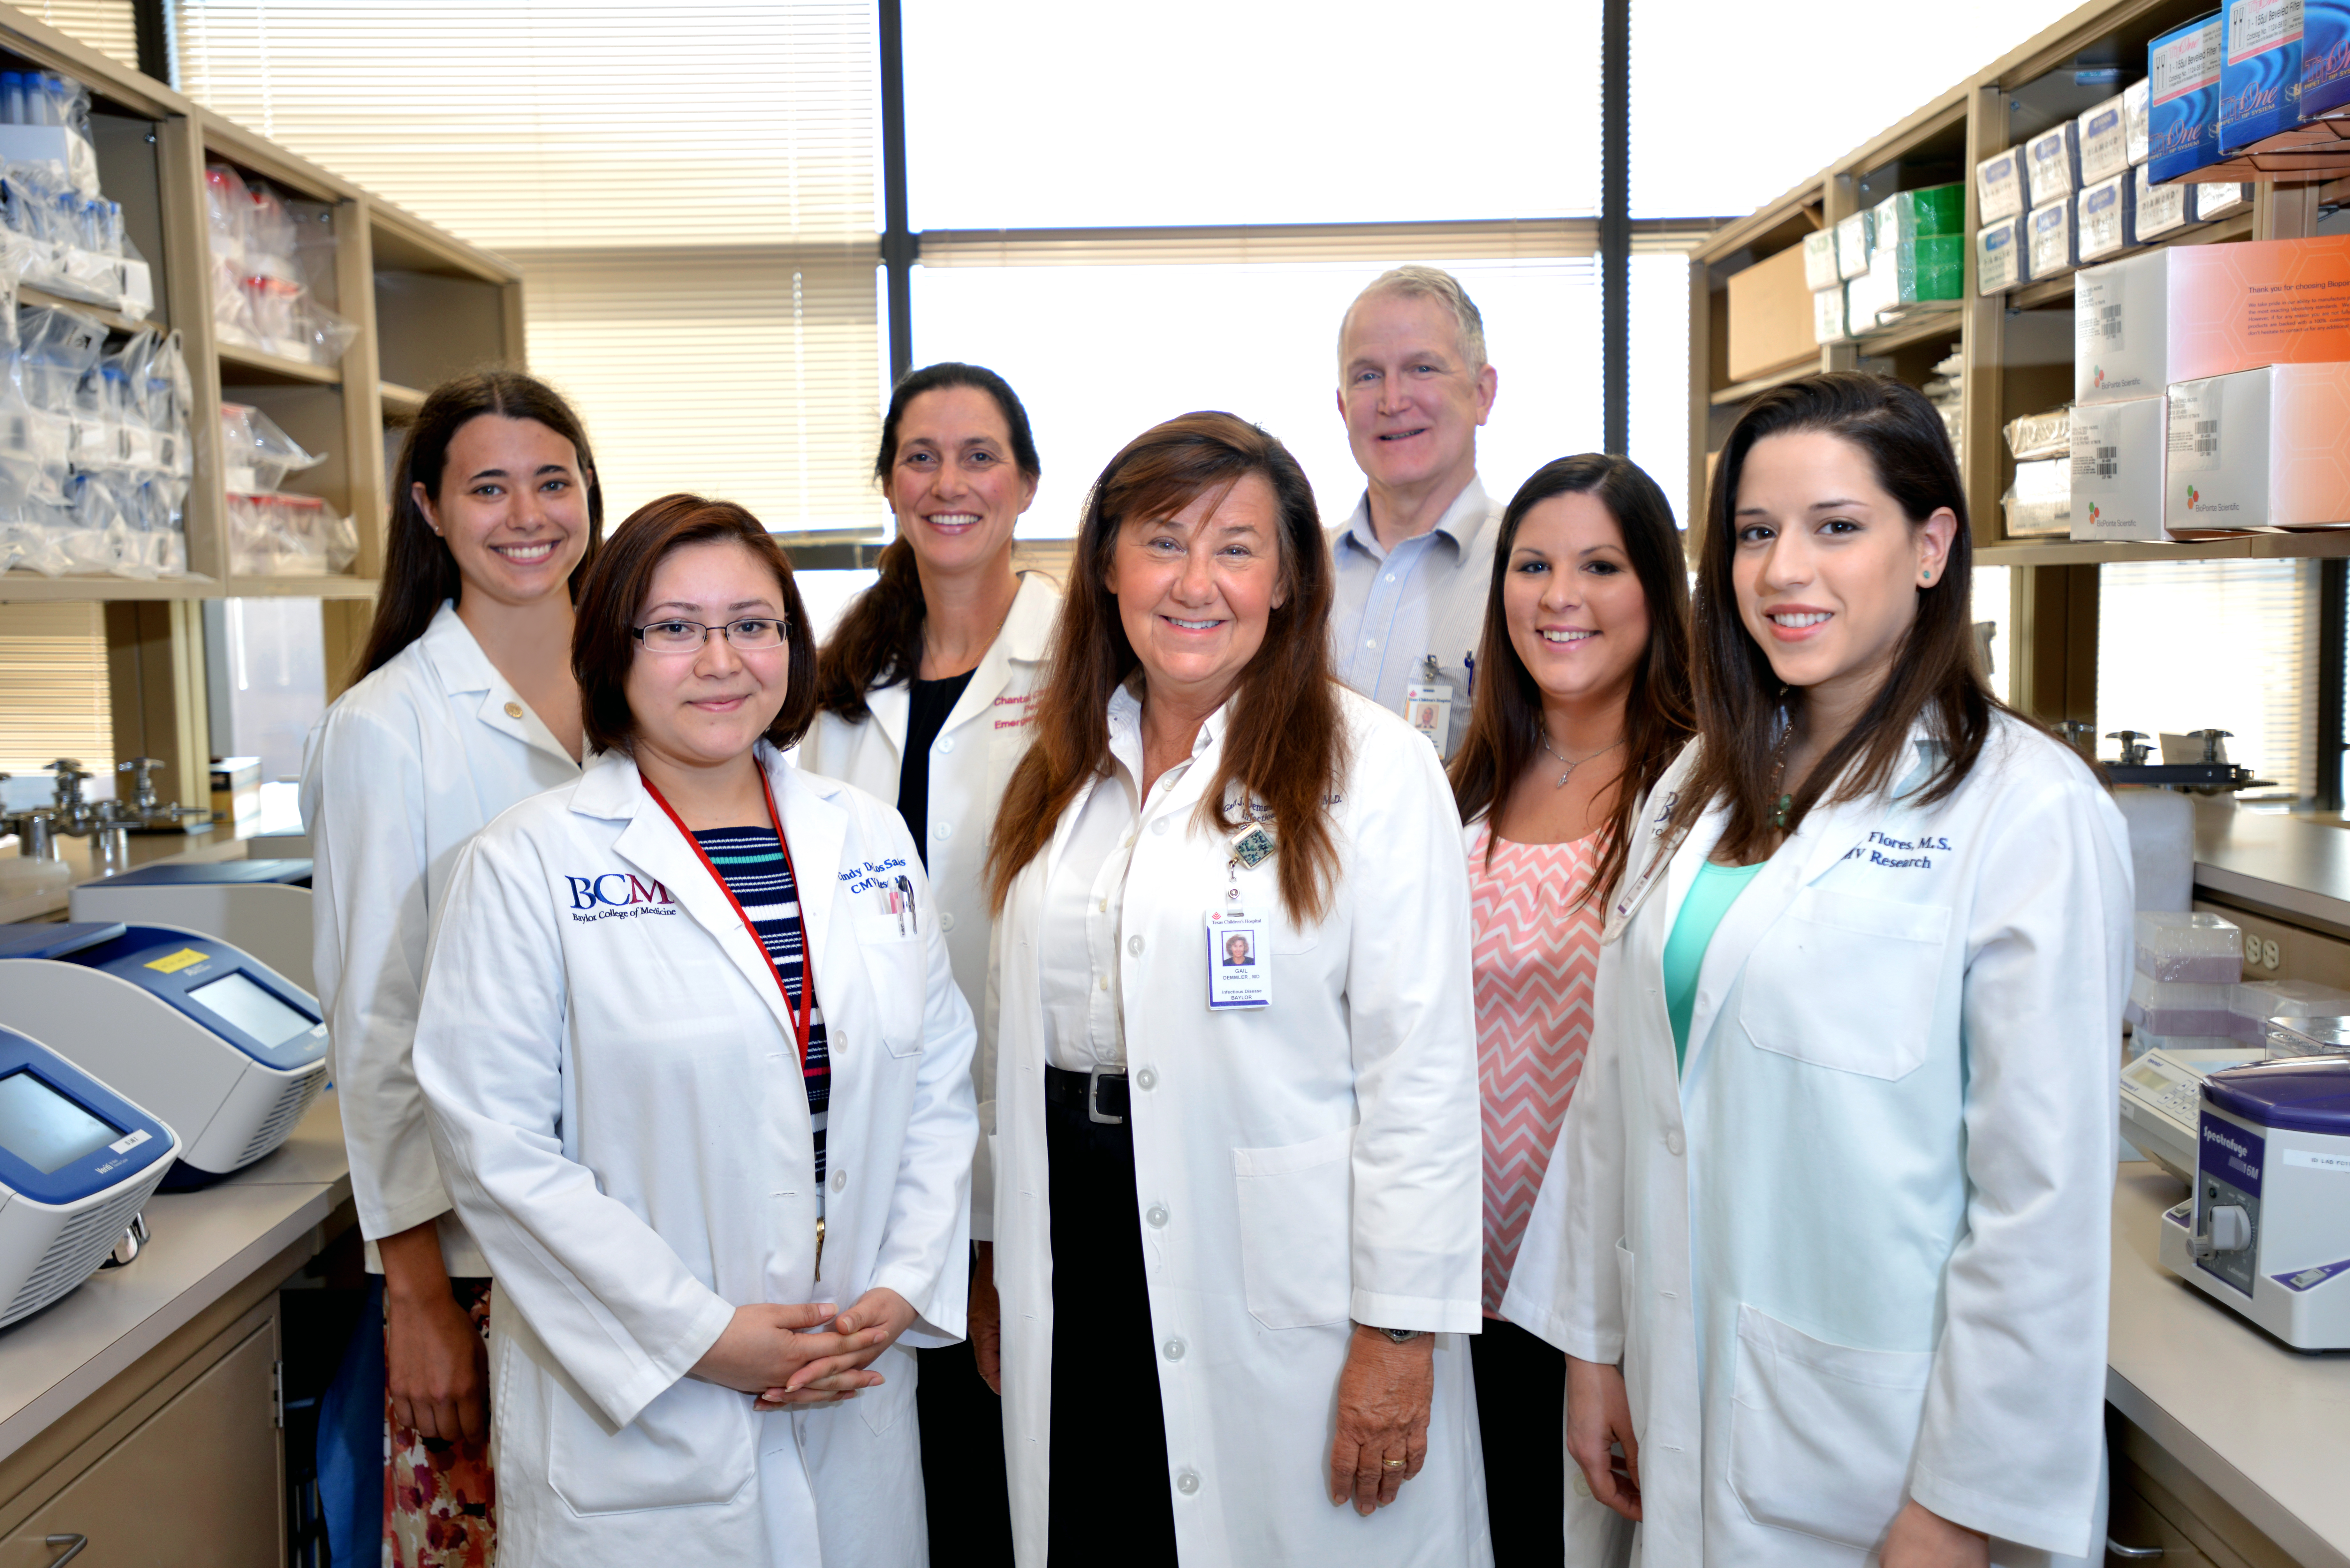 CMV Team at Baylor College of Medicine has been studying congenital cytomegalovirus [CMV] for over 30 years. Current members of the research team are: Back row, left to right: Hanna Baer, M.D., A. Chantal Caviness, M.D. Ph.D MPH, Jerry Miller Ph.D. Front Row: Cindy des los Santos, Gail Demmler-Harrison M.D., Jill Johnson, MA, Marily Flores, MS. Not shown- Douglas Jin, MS2 